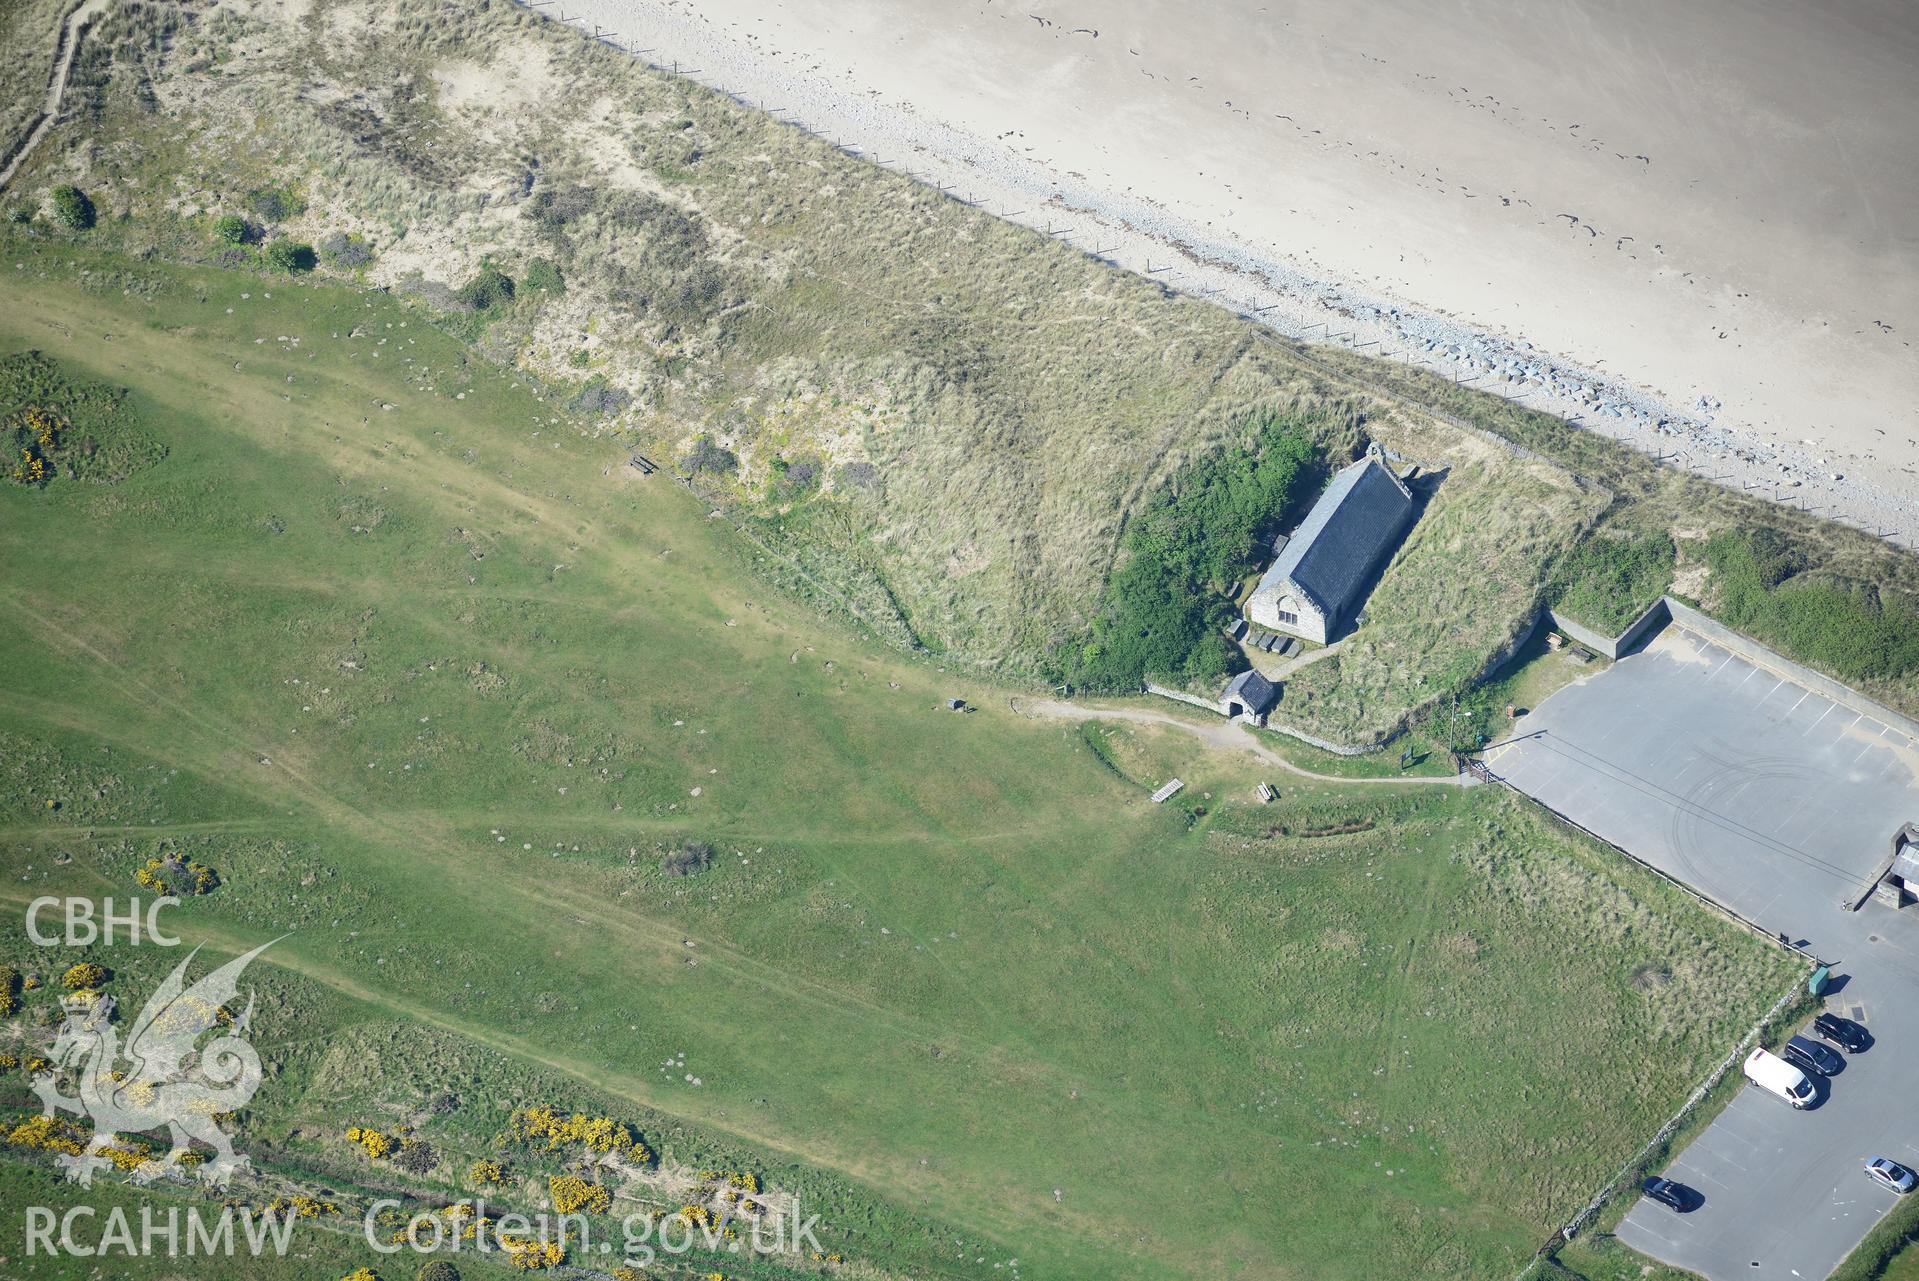 Aerial photography of St Tanwg's Church taken on 3rd May 2017.  Baseline aerial reconnaissance survey for the CHERISH Project. ? Crown: CHERISH PROJECT 2017. Produced with EU funds through the Ireland Wales Co-operation Programme 2014-2020. All material